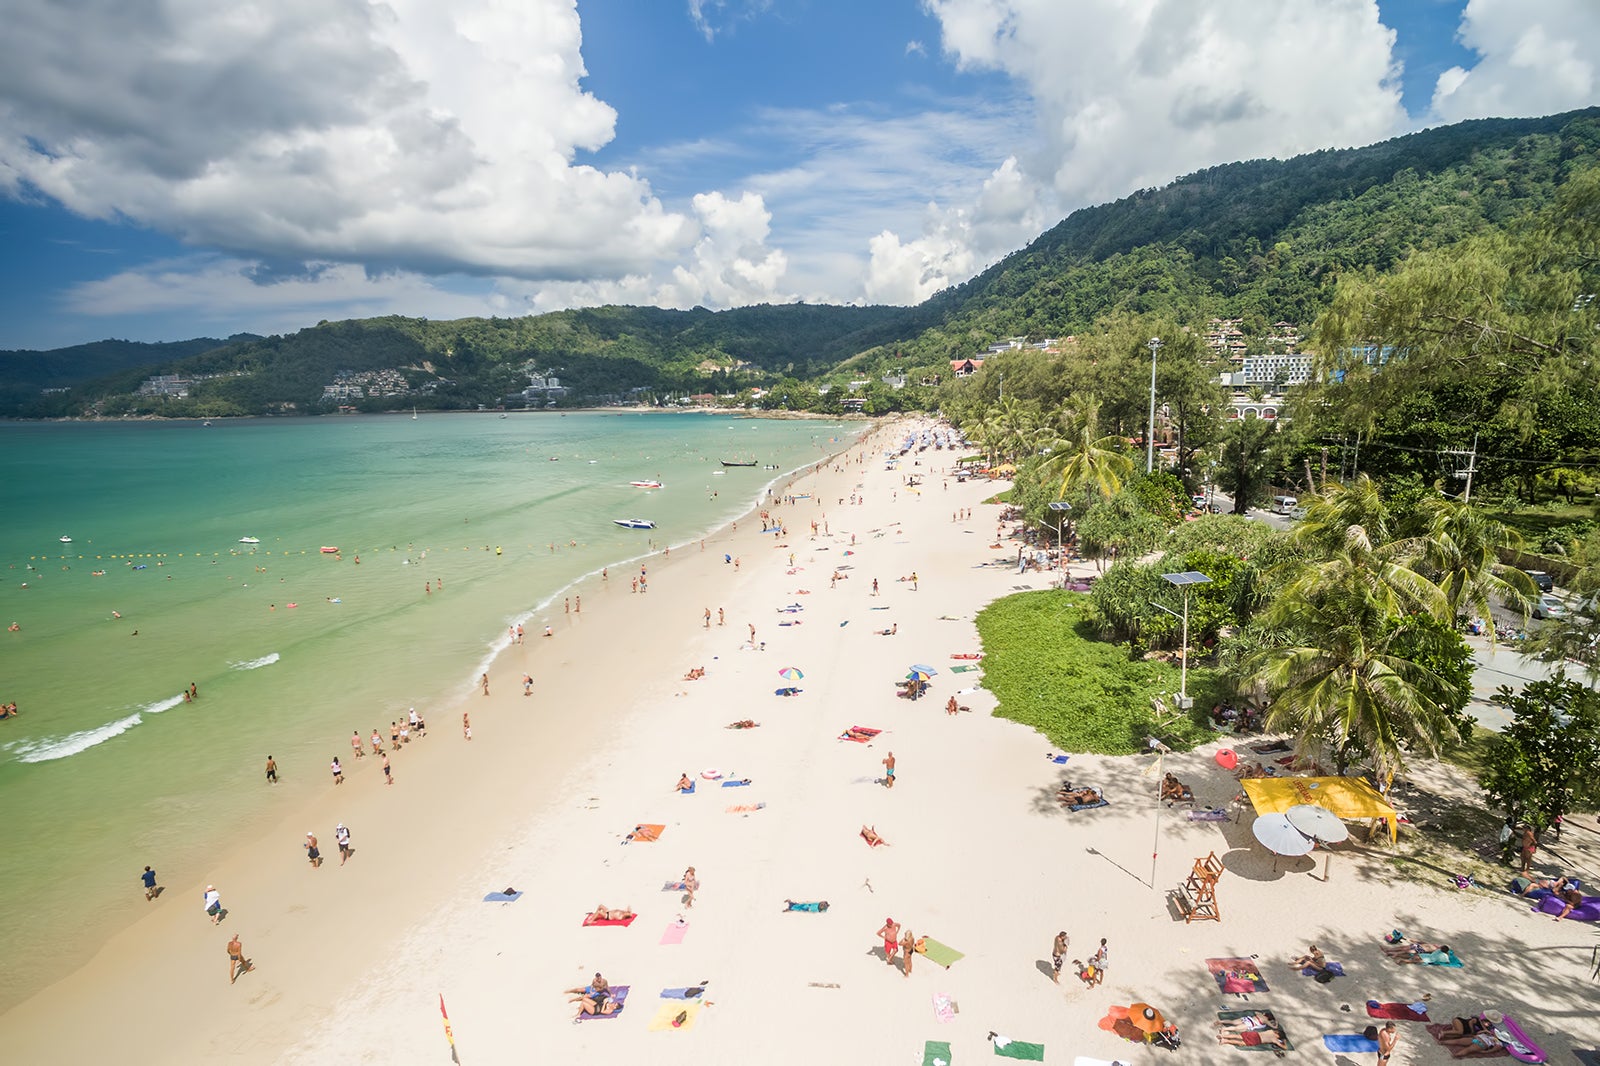 5 Must-Visit Attractions in Phuket - Description and highlights of Patong Beach